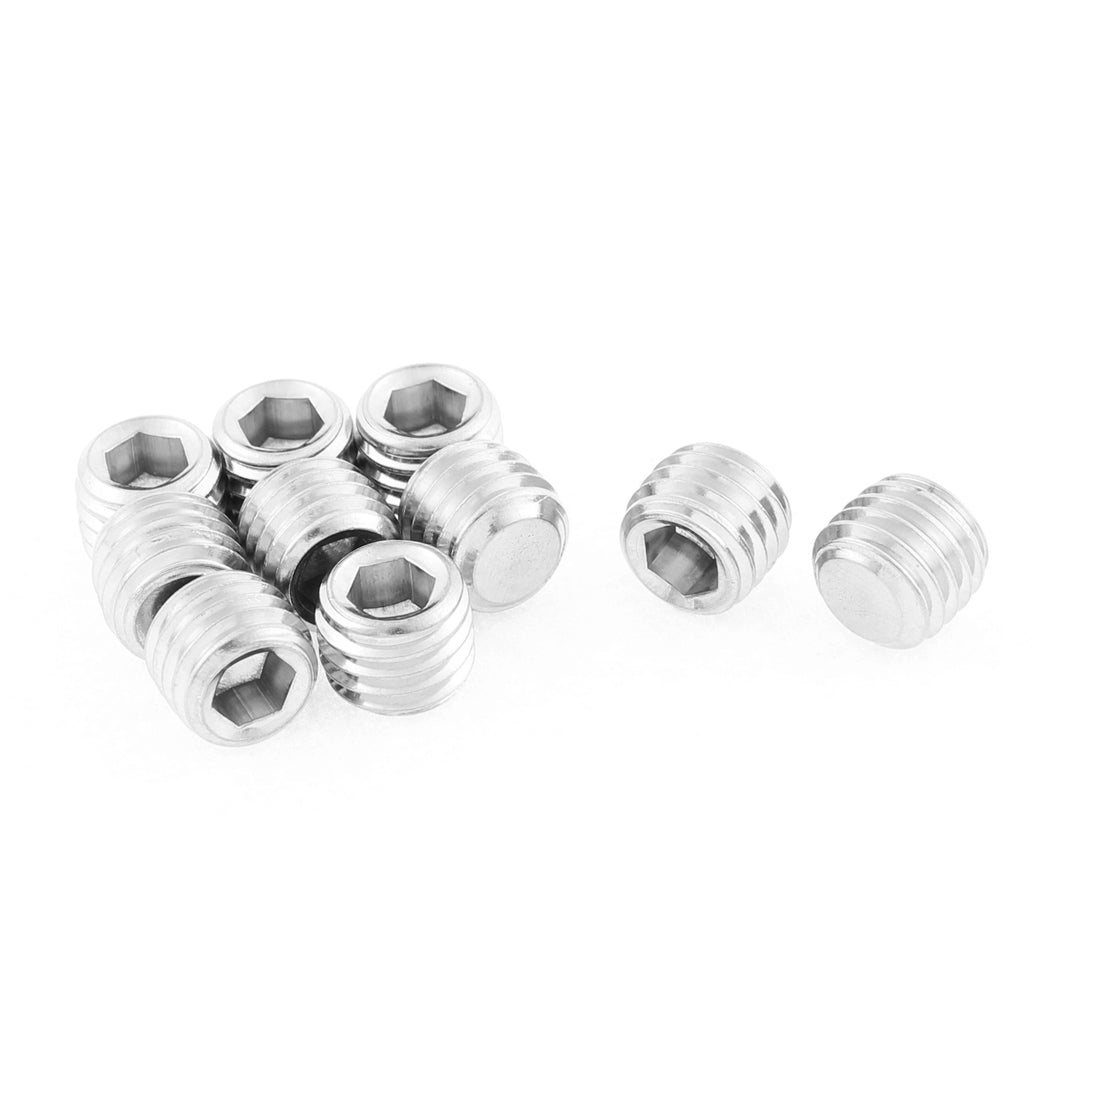 uxcell Uxcell M12x10mm 1.75mm Pitch Stainless Steel Hex Socket Set Flat Point Grub Screws 10pcs